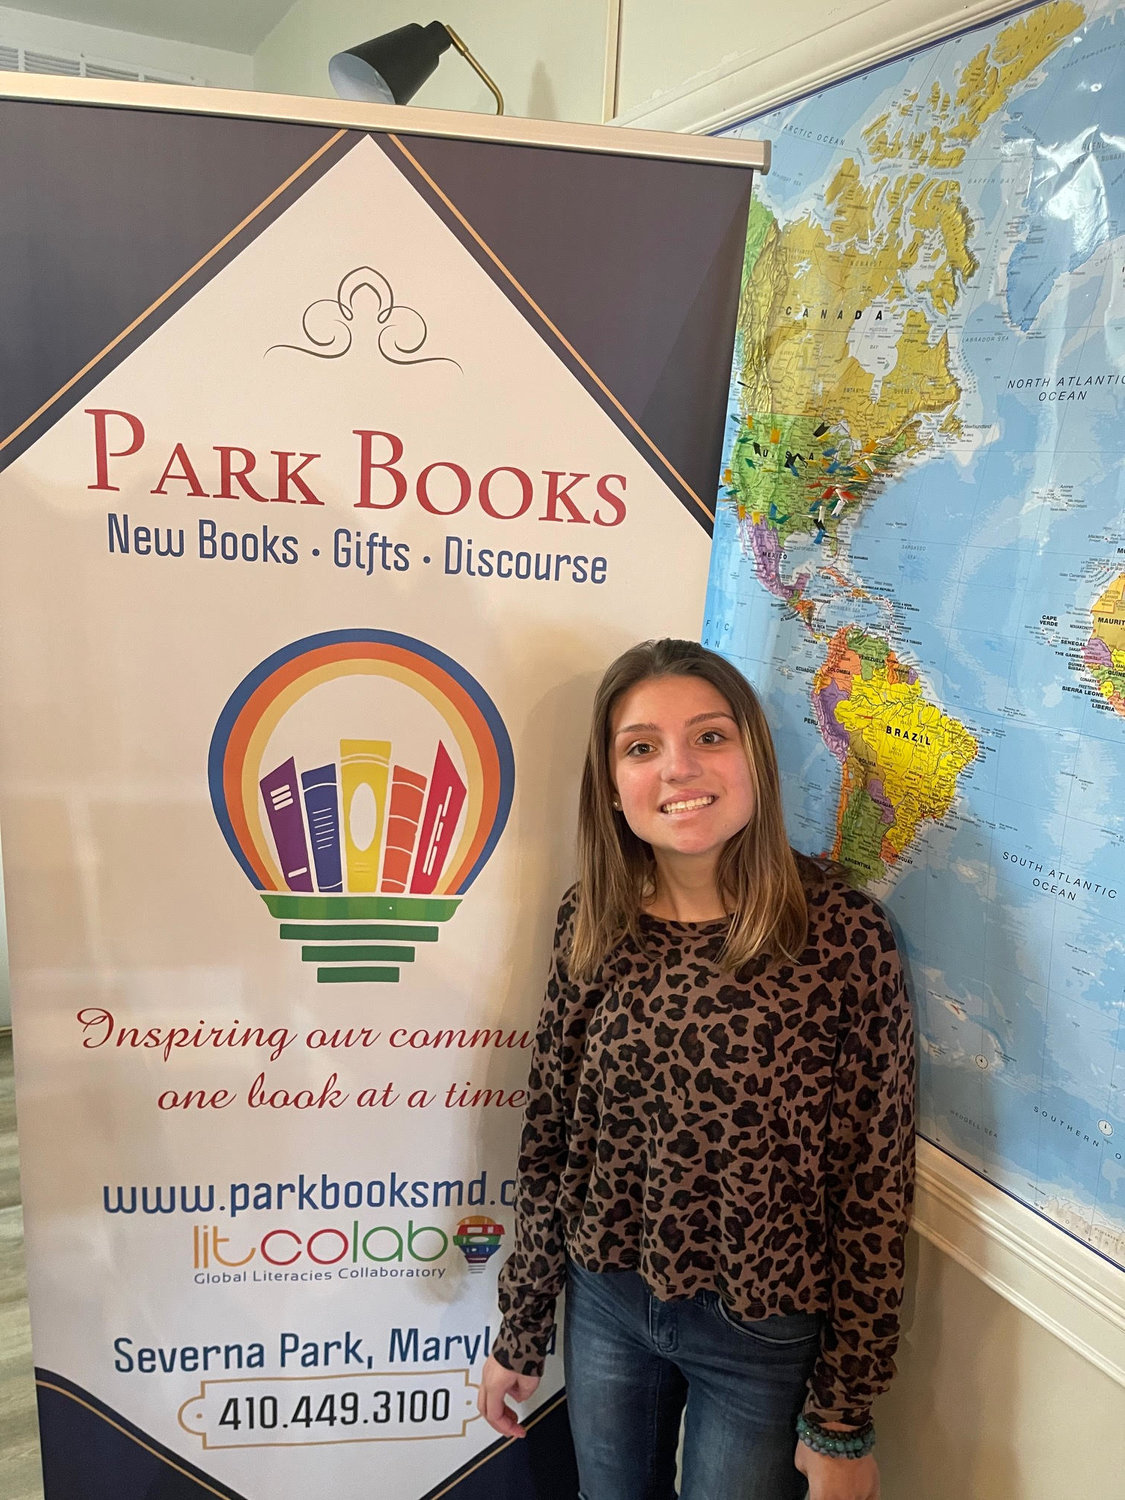 Natalie Recor gains experience and she loves meeting new people at Park Books.